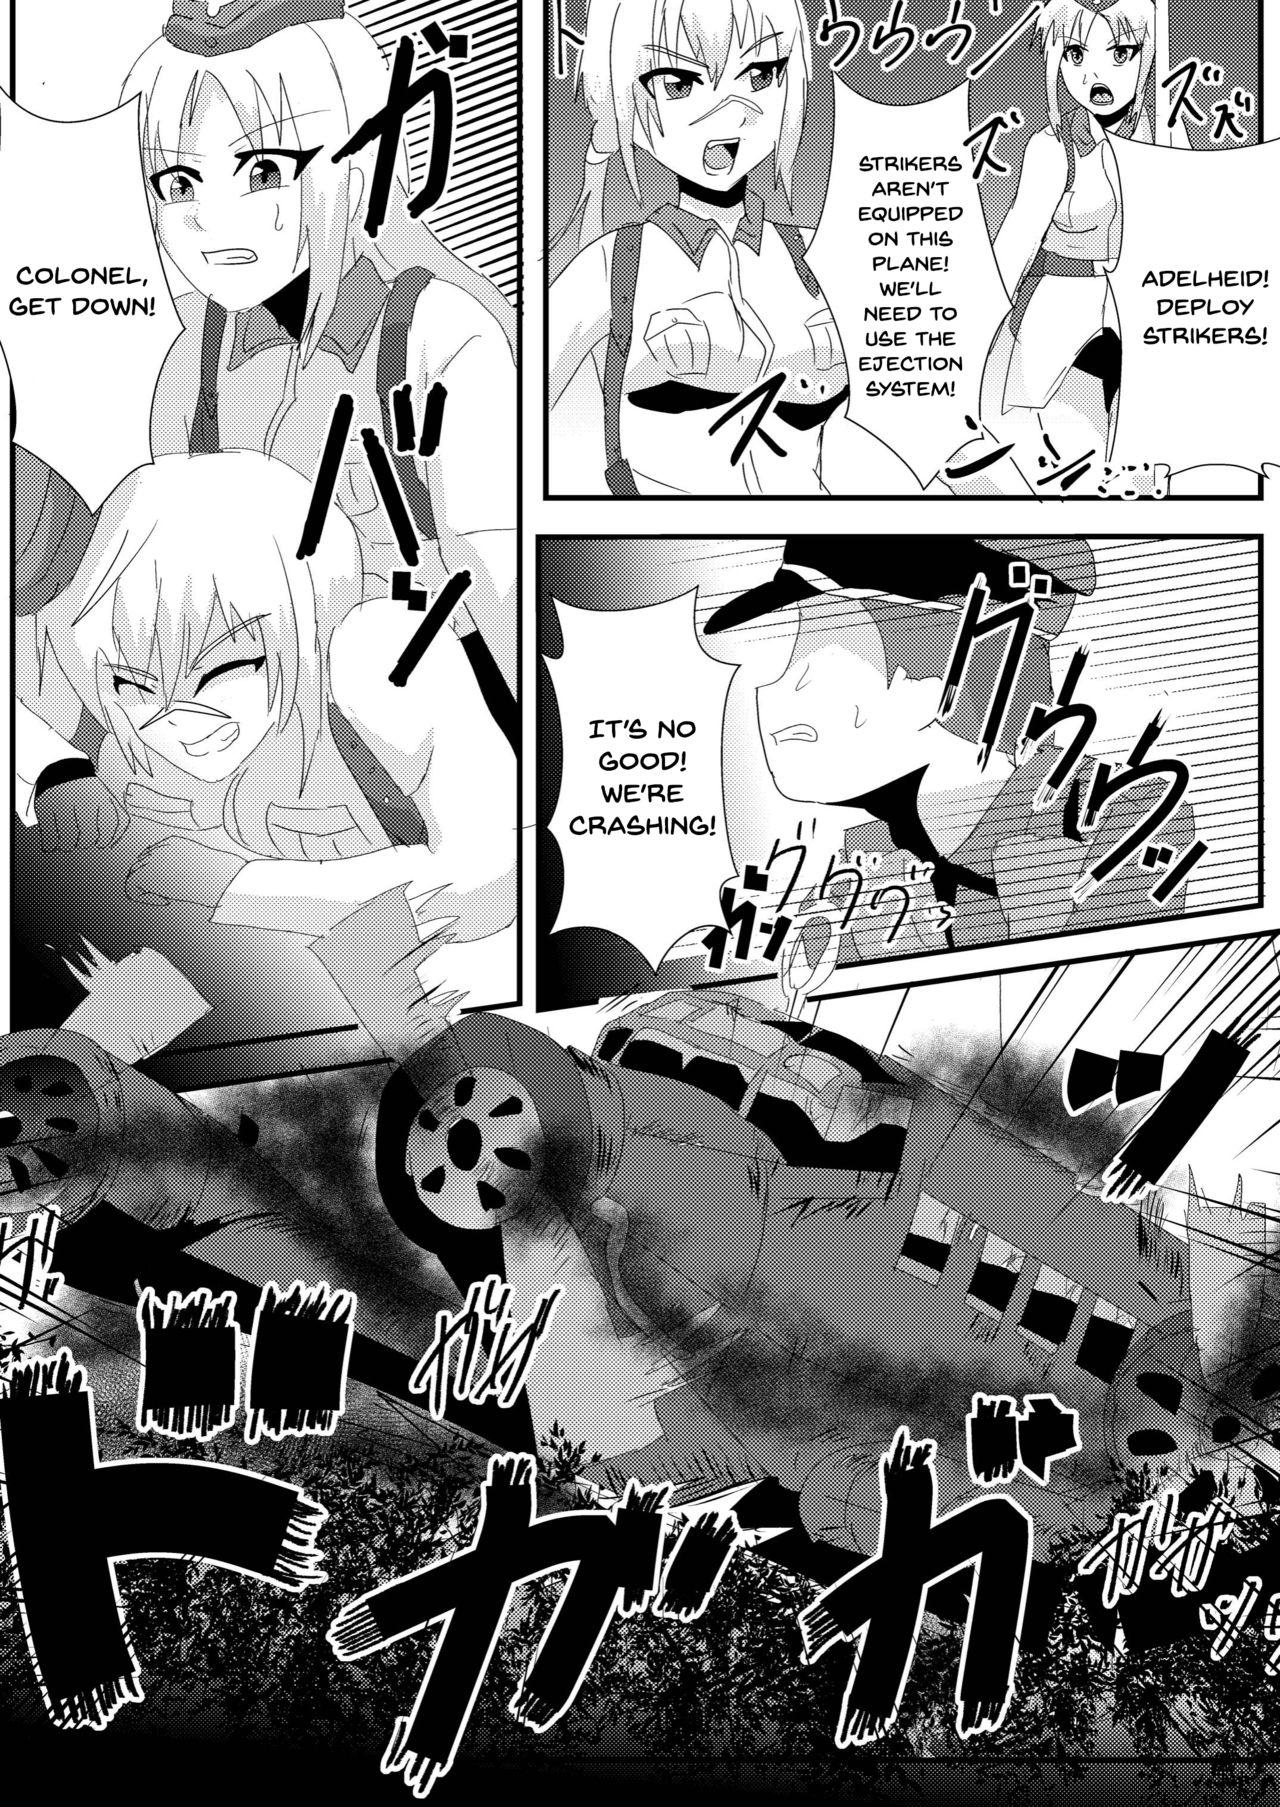 Little Parasite Witches 2 - Strike witches Gorgeous - Page 5